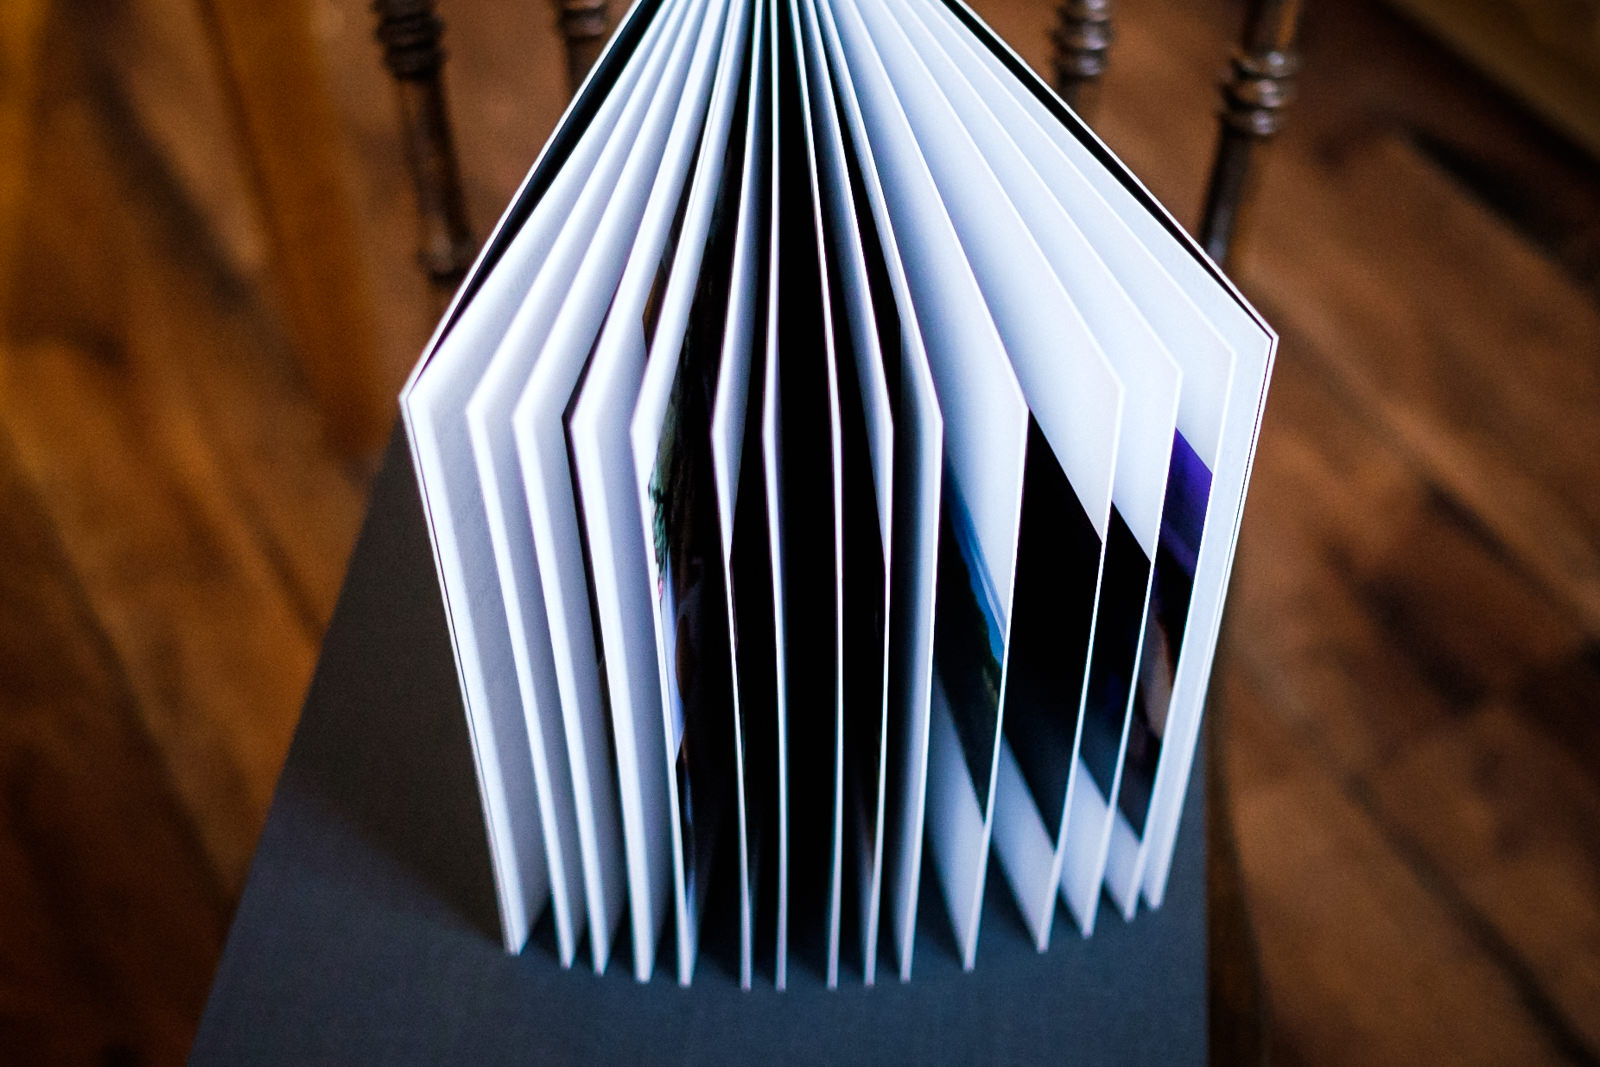 Thick pages of a wedding album fanned out